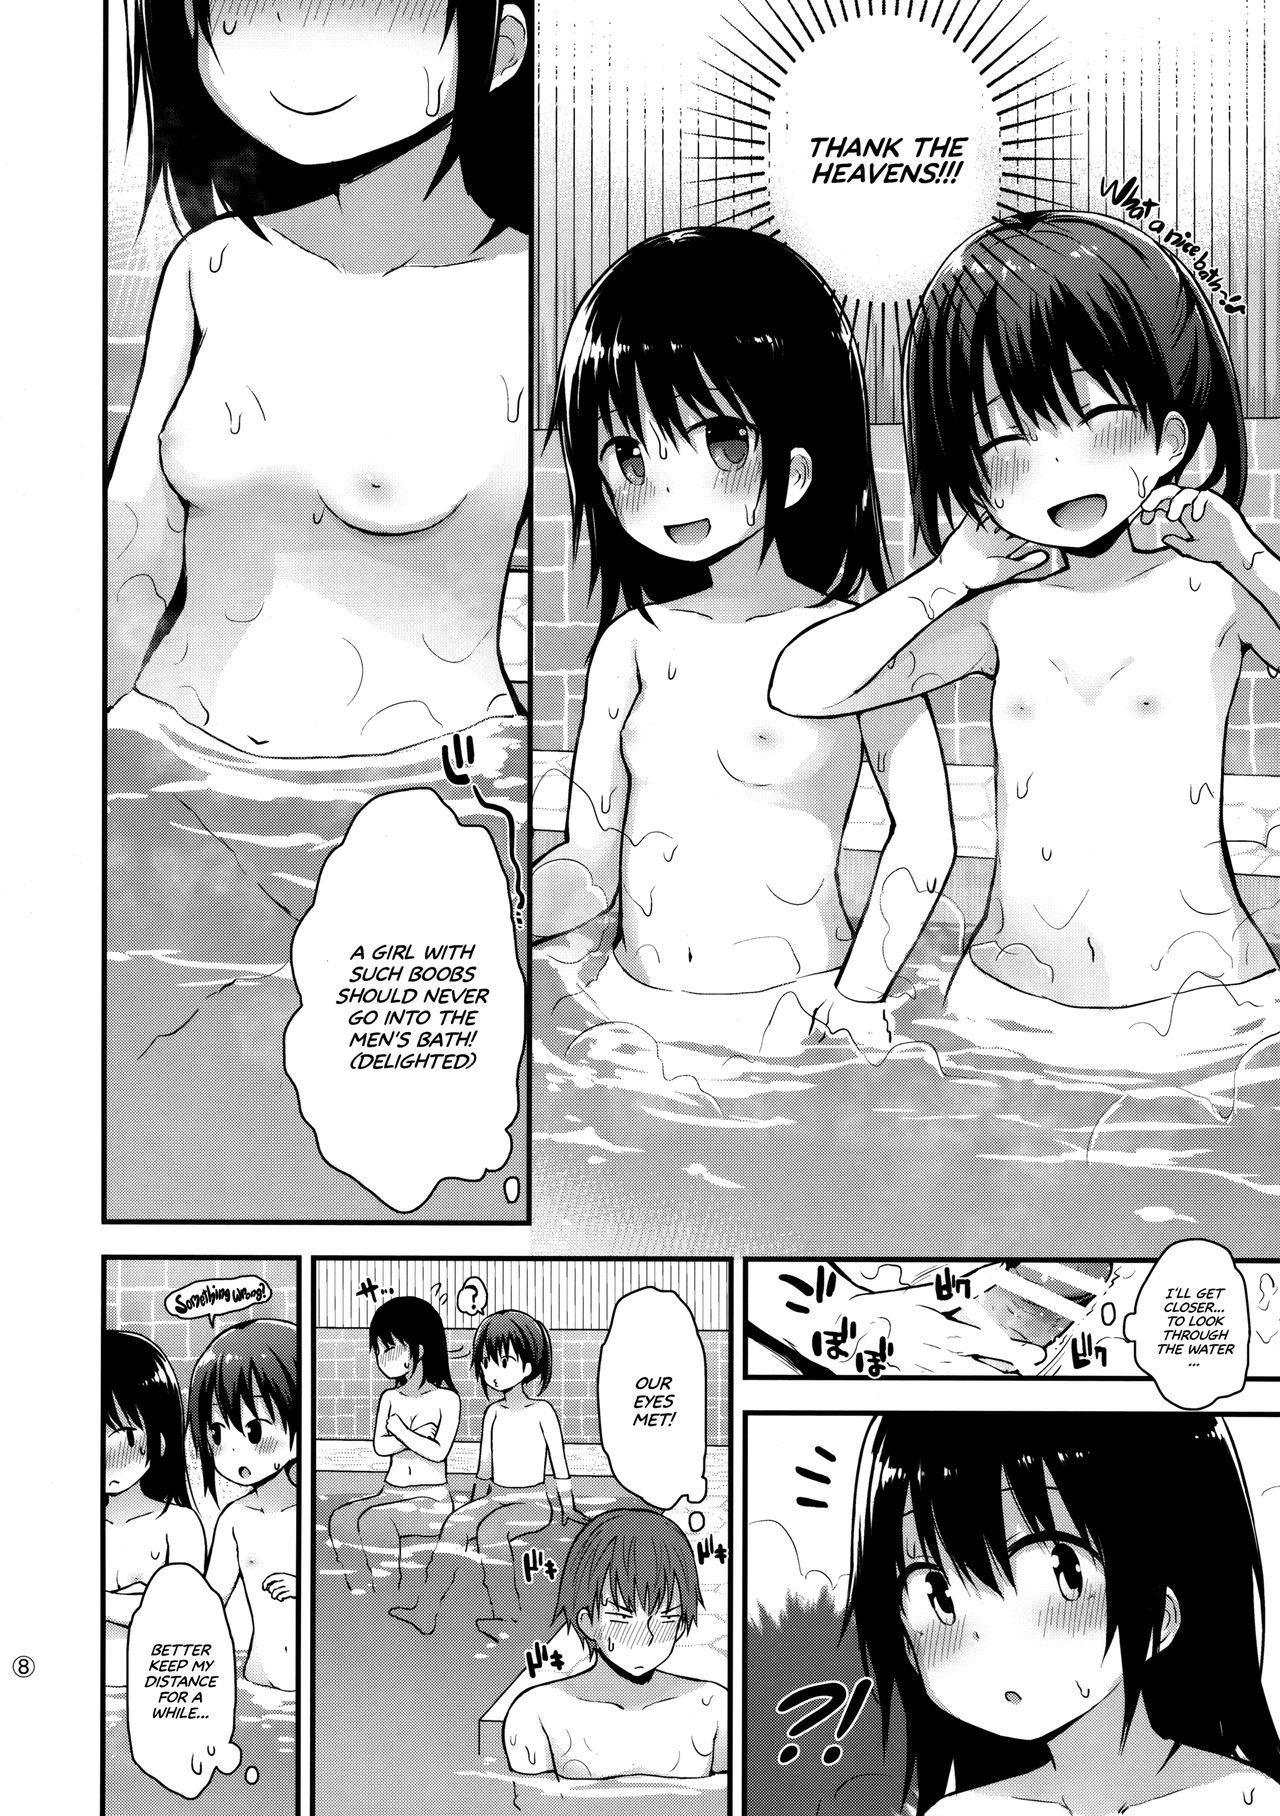 Italiano Onnanoko datte Otokoyu ni Hairitai | They may just be little girls, but they still want to enter the men's bath! - Original Topless - Page 7